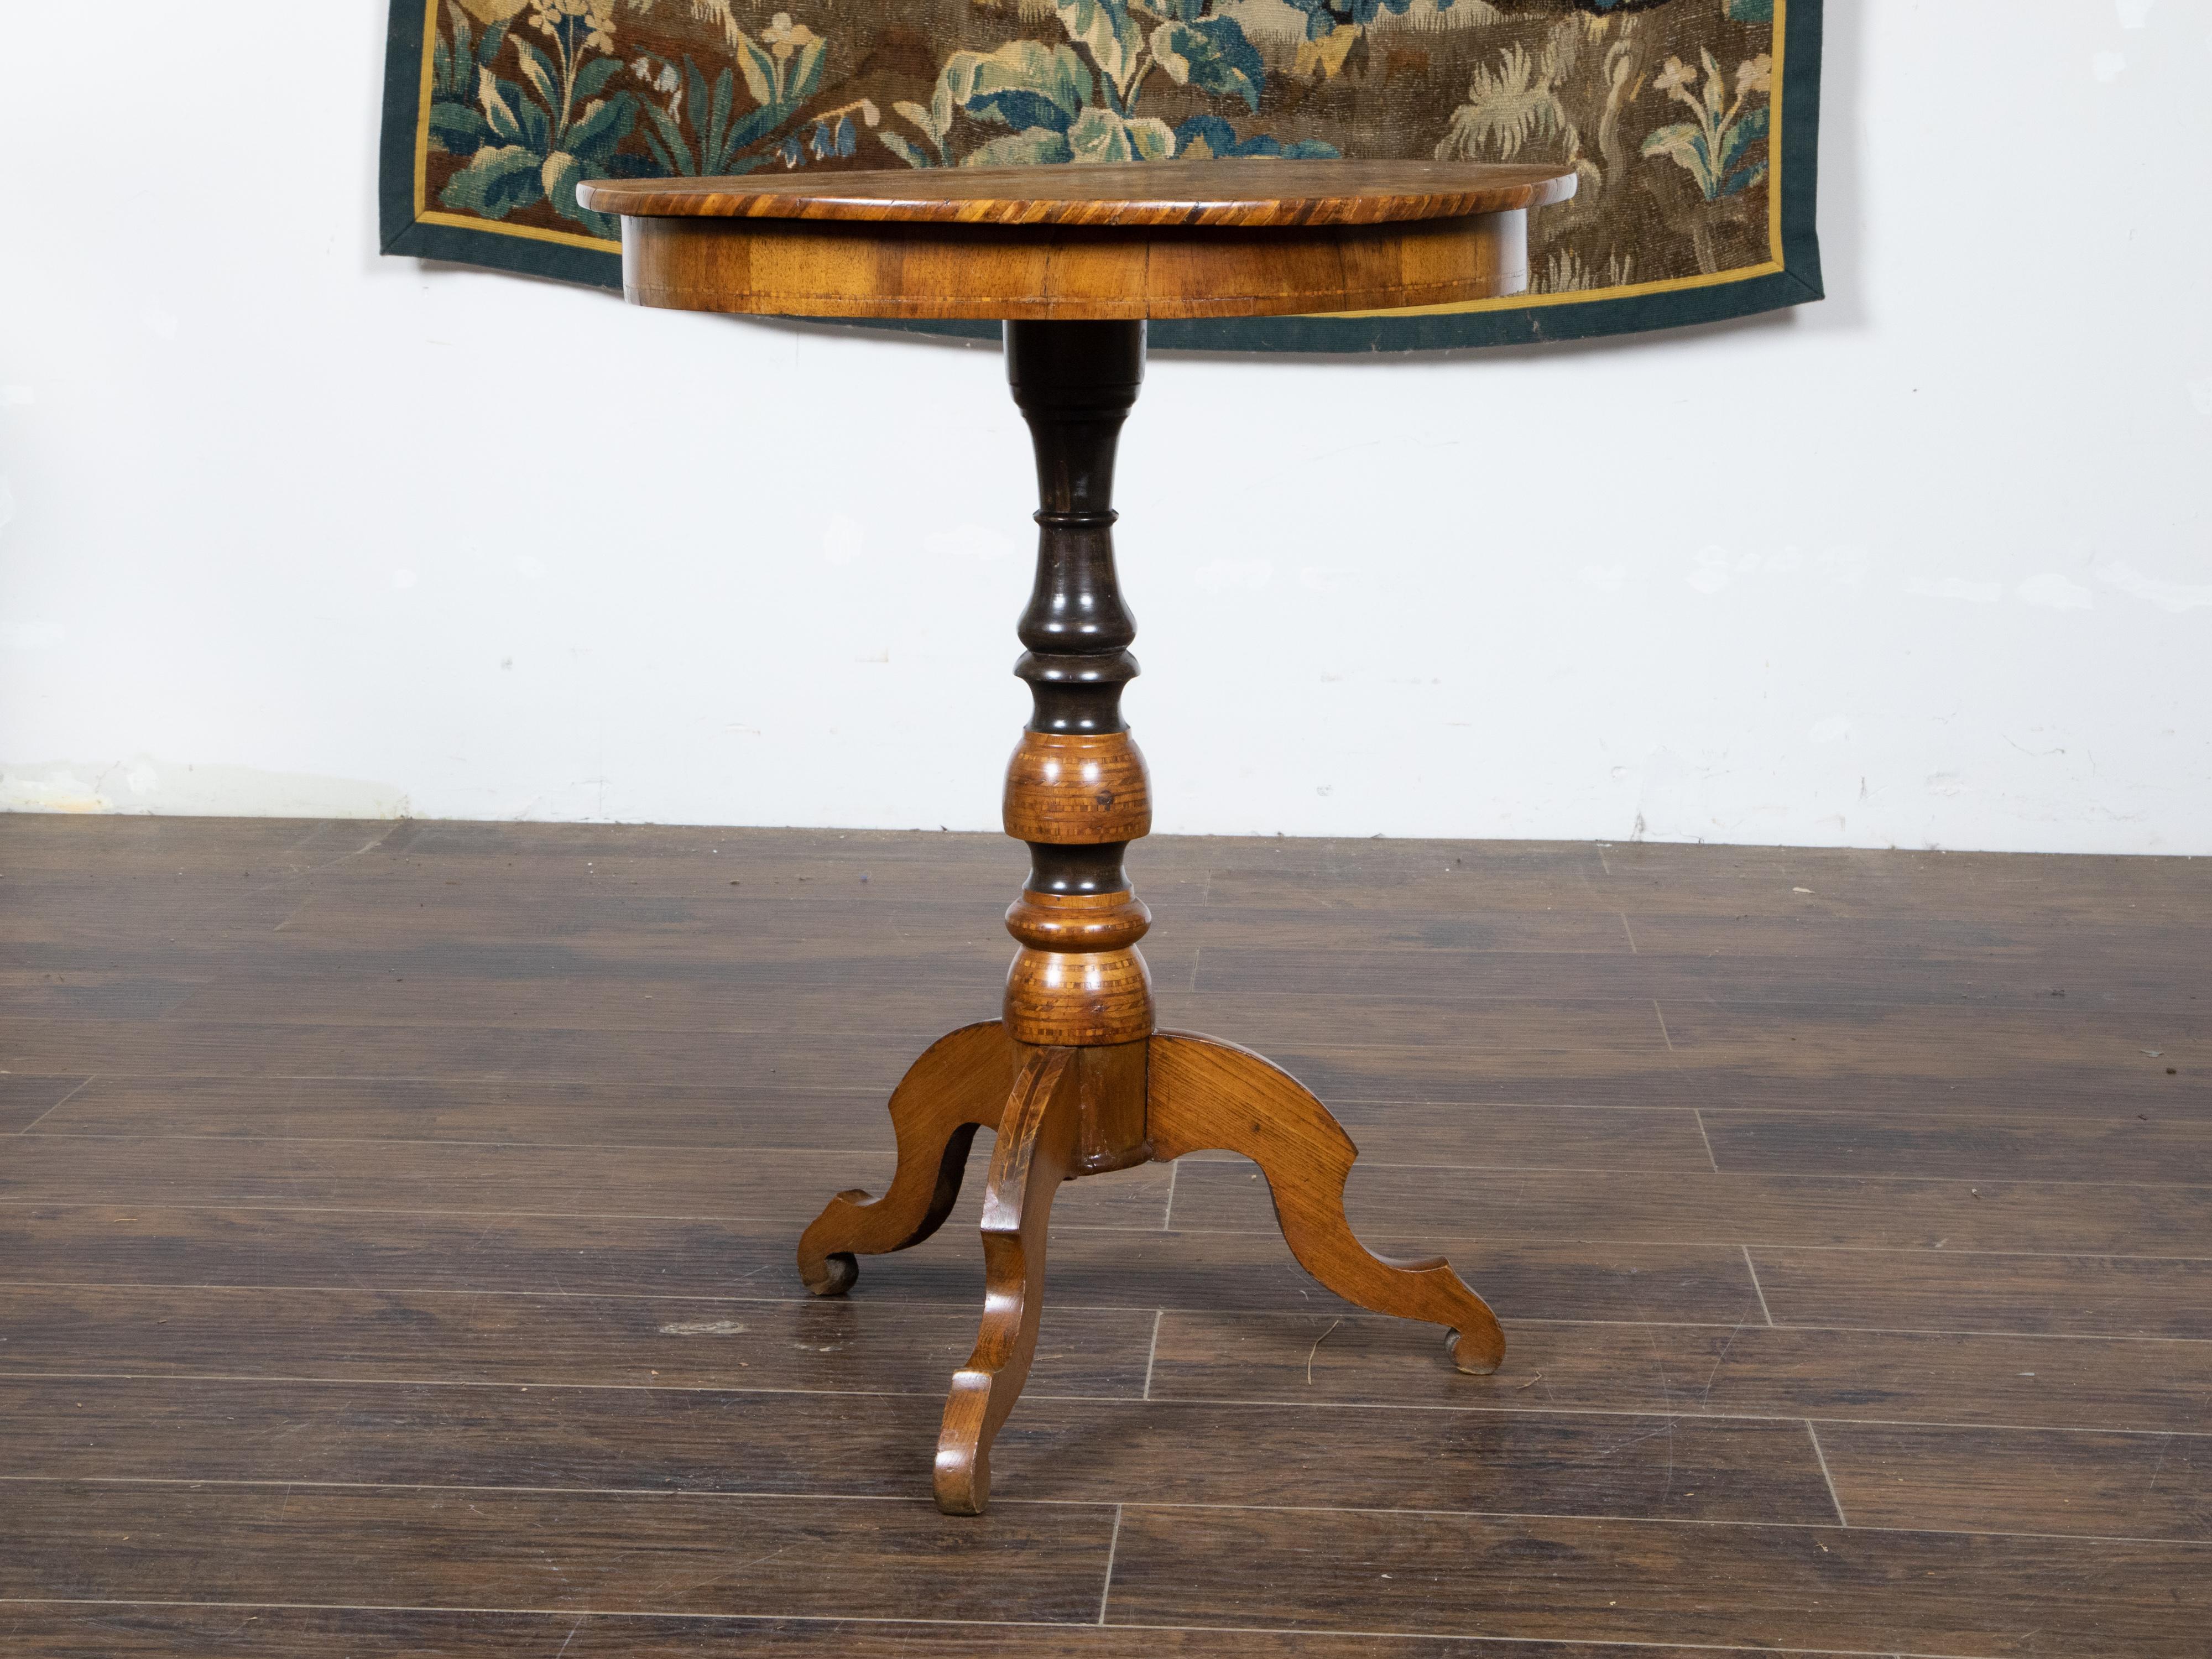 An Italian walnut guéridon side table from the late 19th century with round marquetry decorated top, carved and ebonized pedestal and tripod base. Created in Italy during the last quarter of the 19th century, this guéridon table attracts our